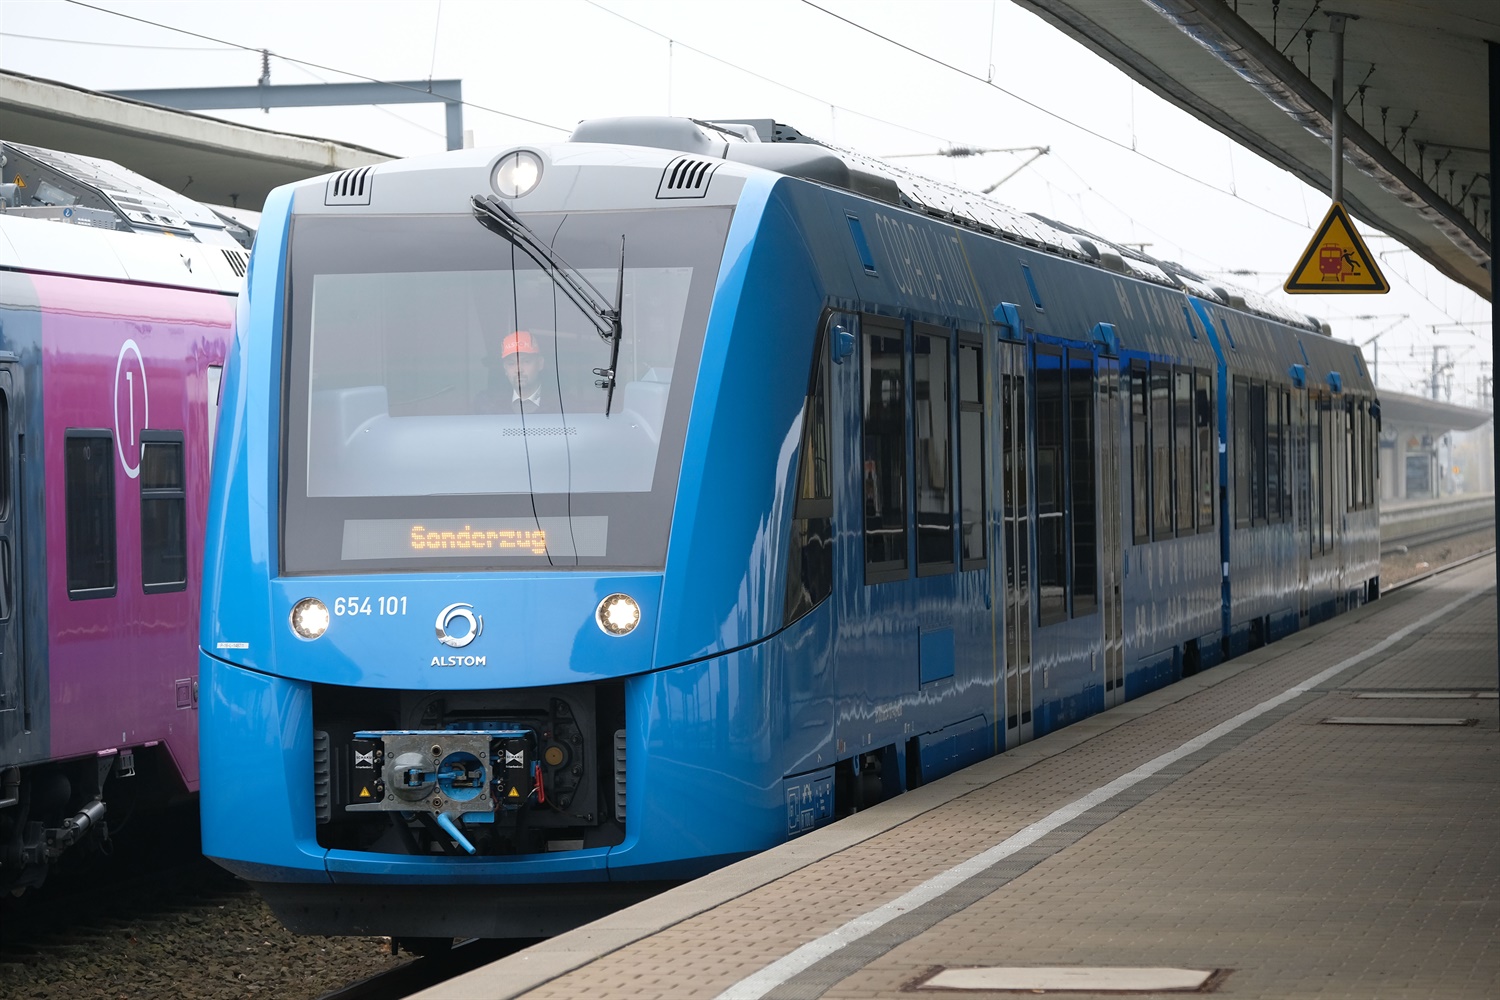 Government voices ambition to make hydrogen trains ‘a priority’ in future